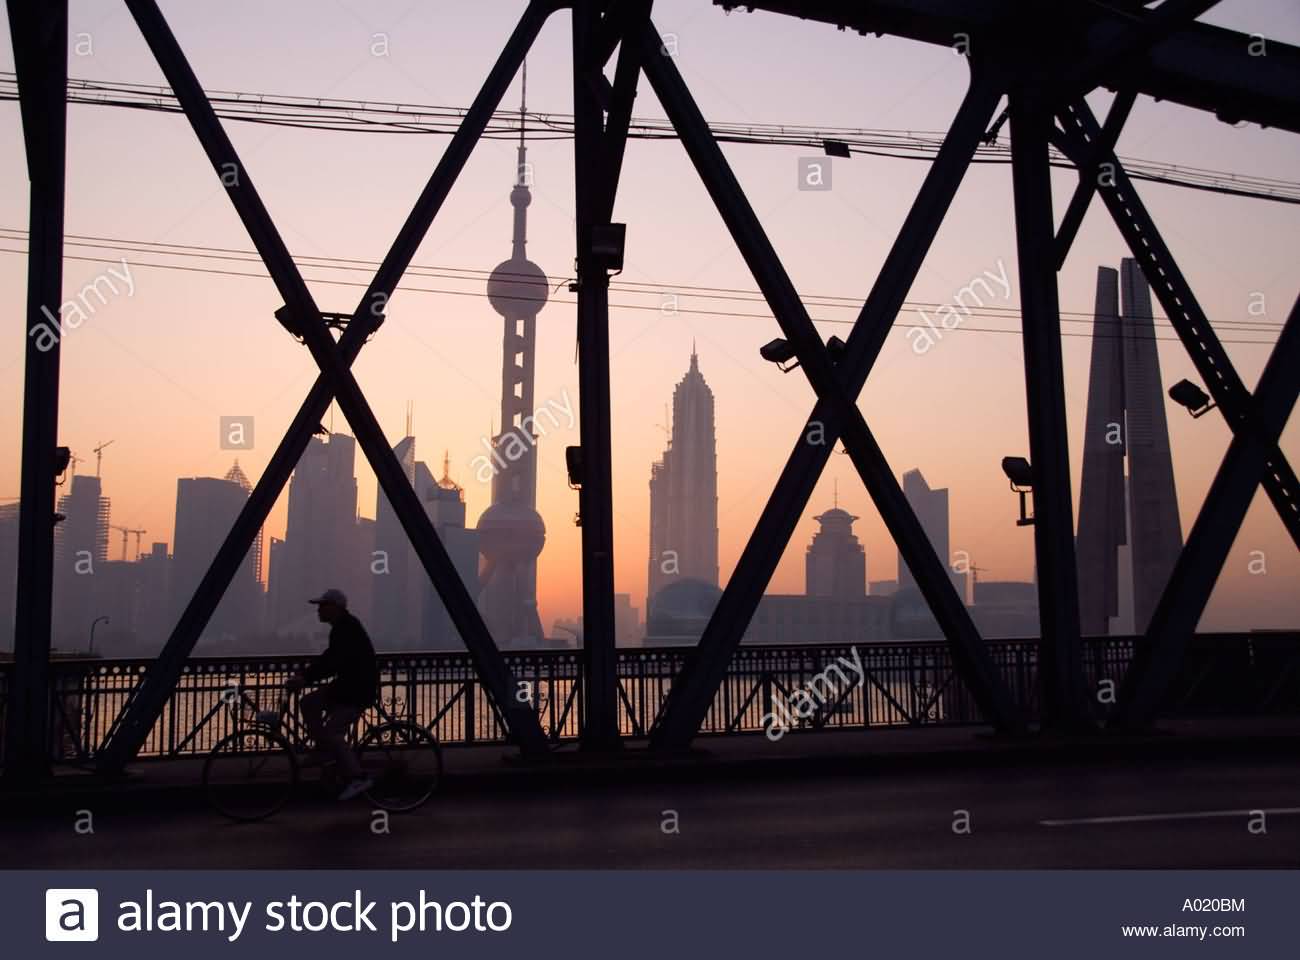 Cyclist Crossing Waibaidu Bridge Over Suzhou River With Pudong Skyline At Dawn